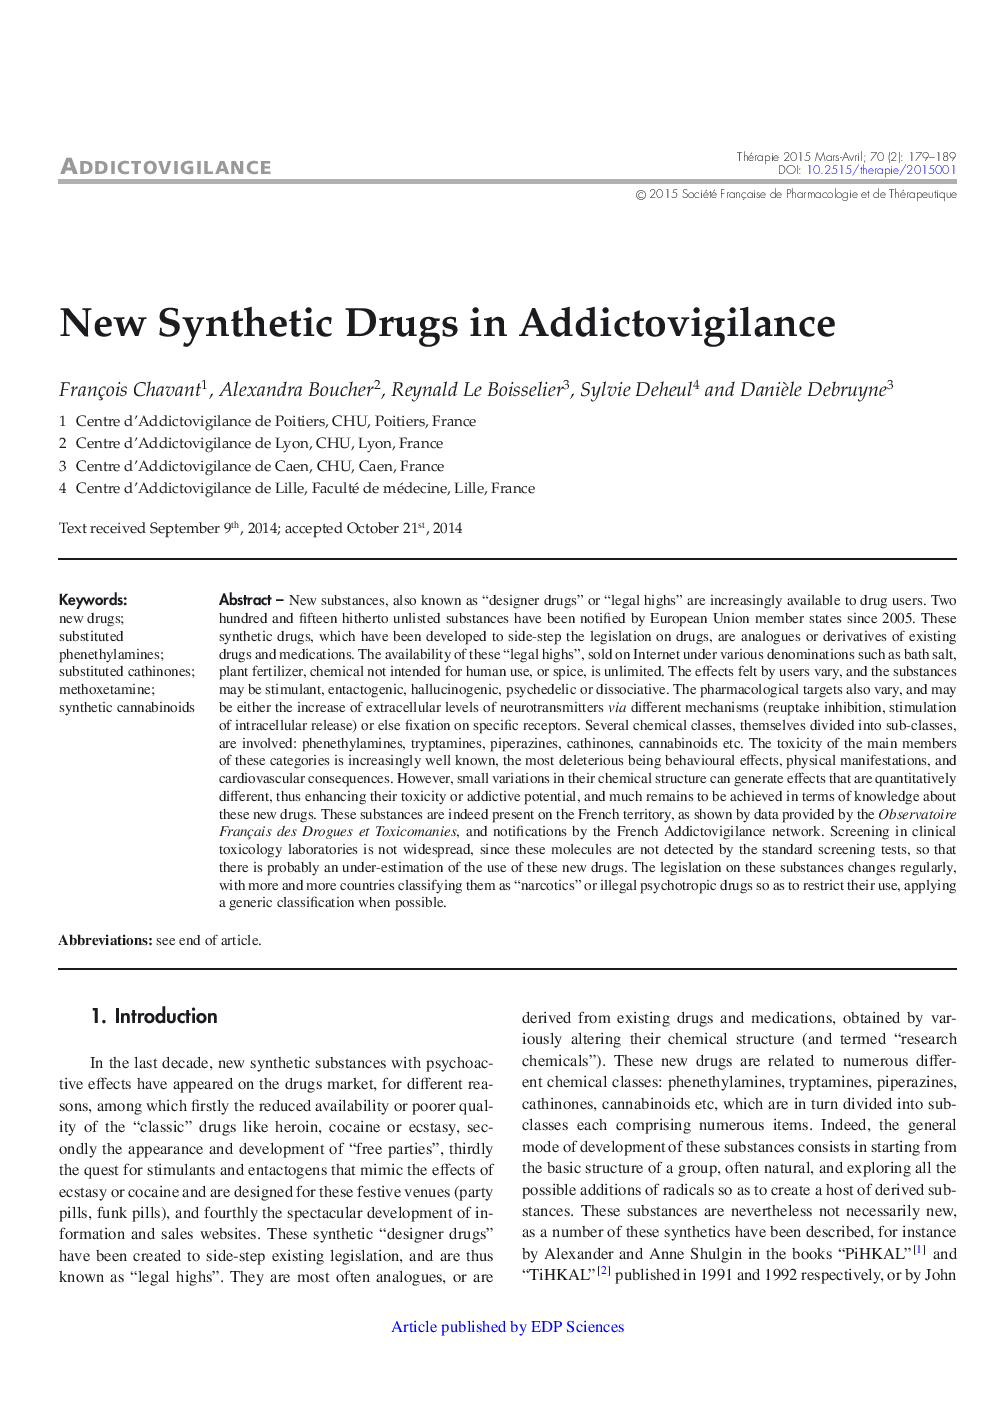 New Synthetic Drugs in Addictovigilance